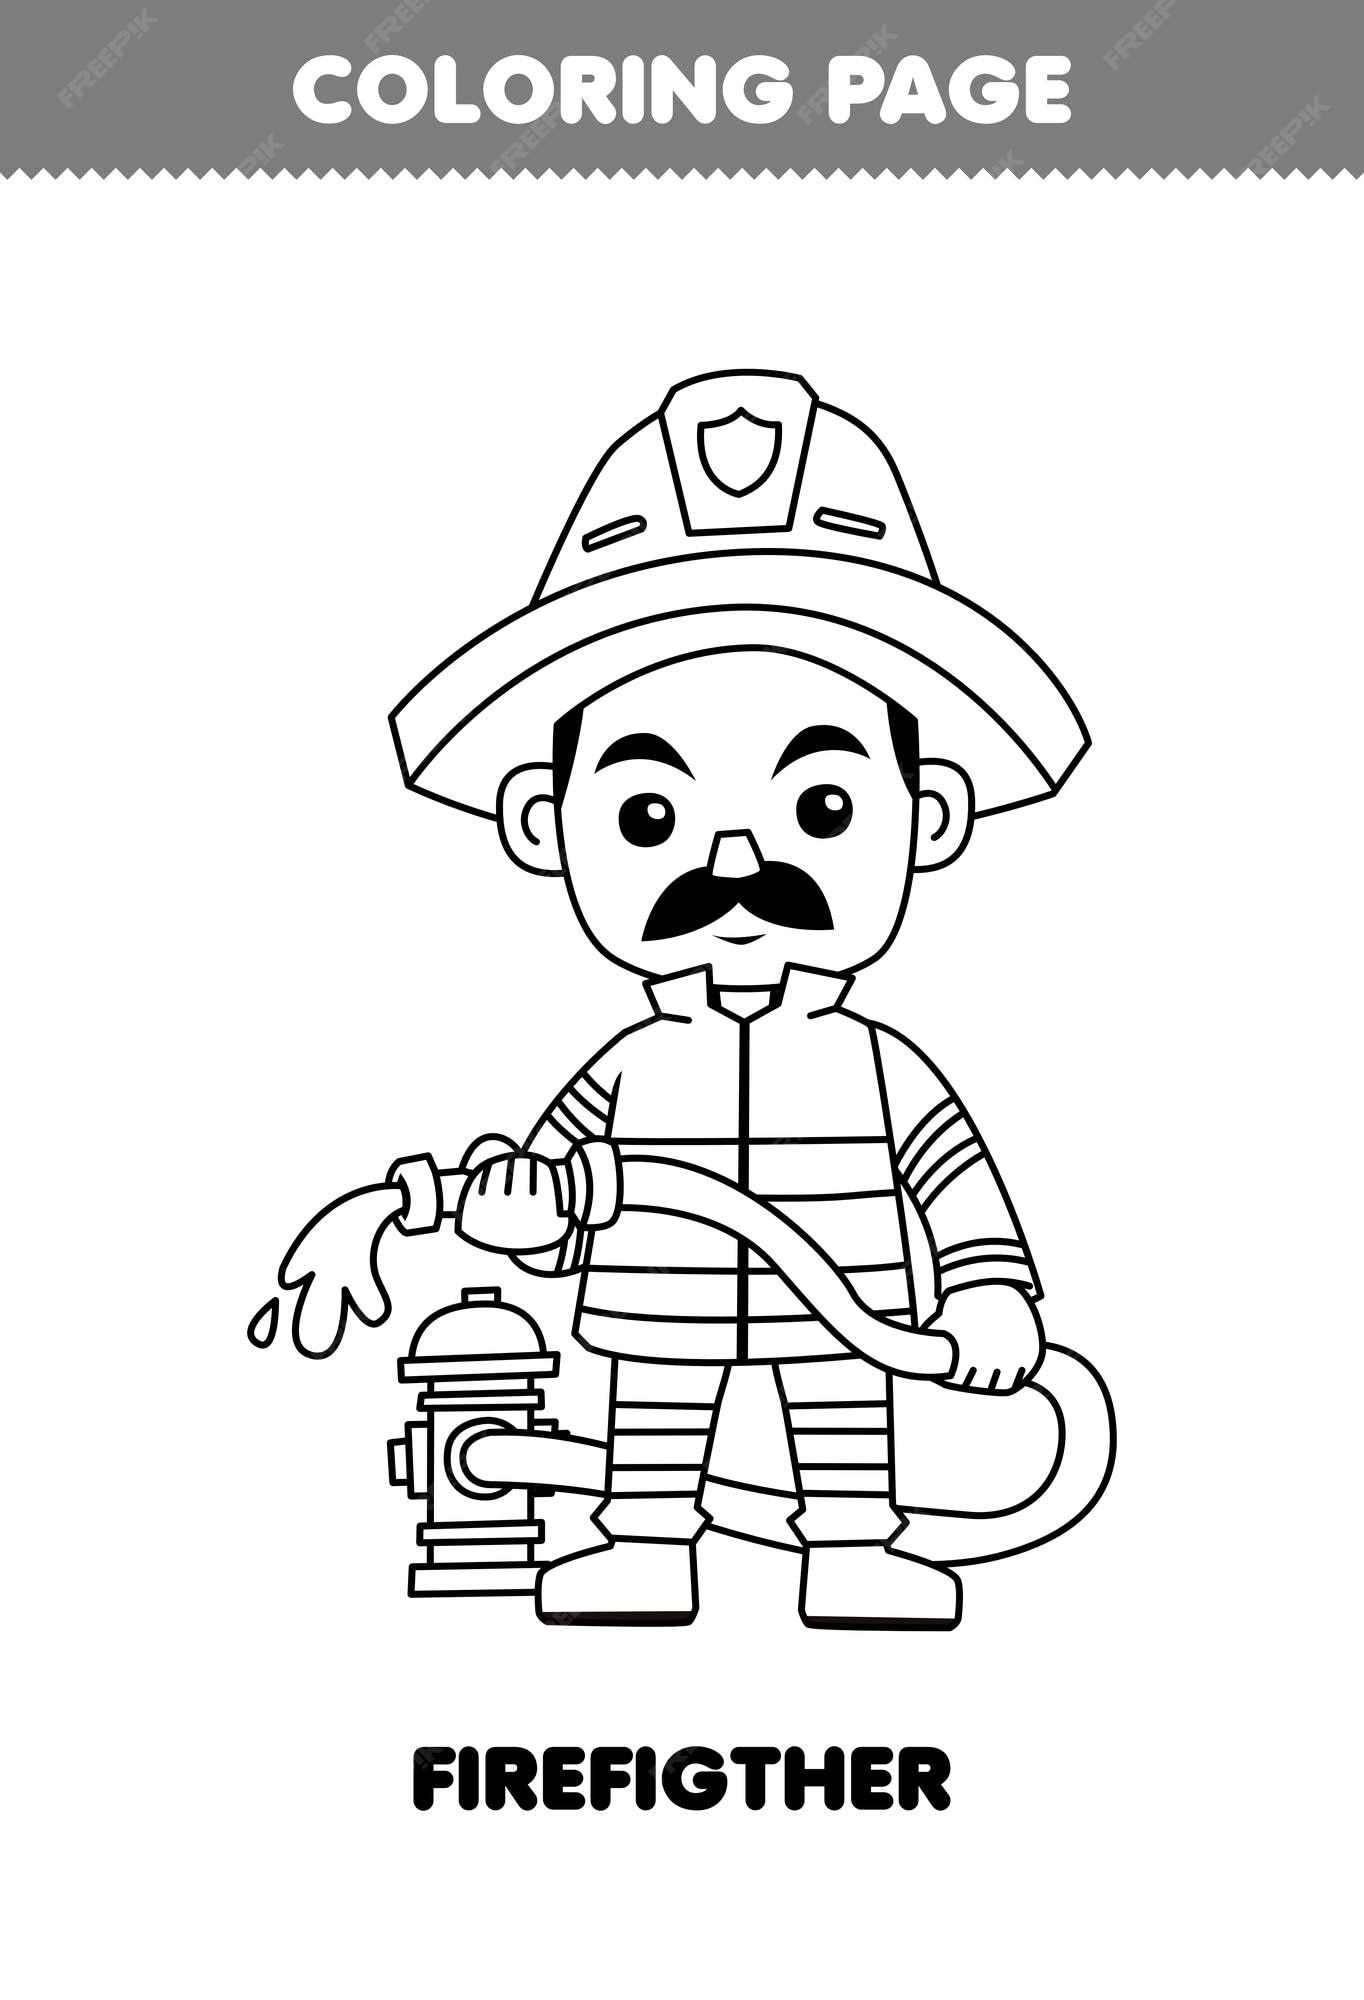 Premium vector education game for children coloring page of cute cartoon firefighter profession line art printable worksheet